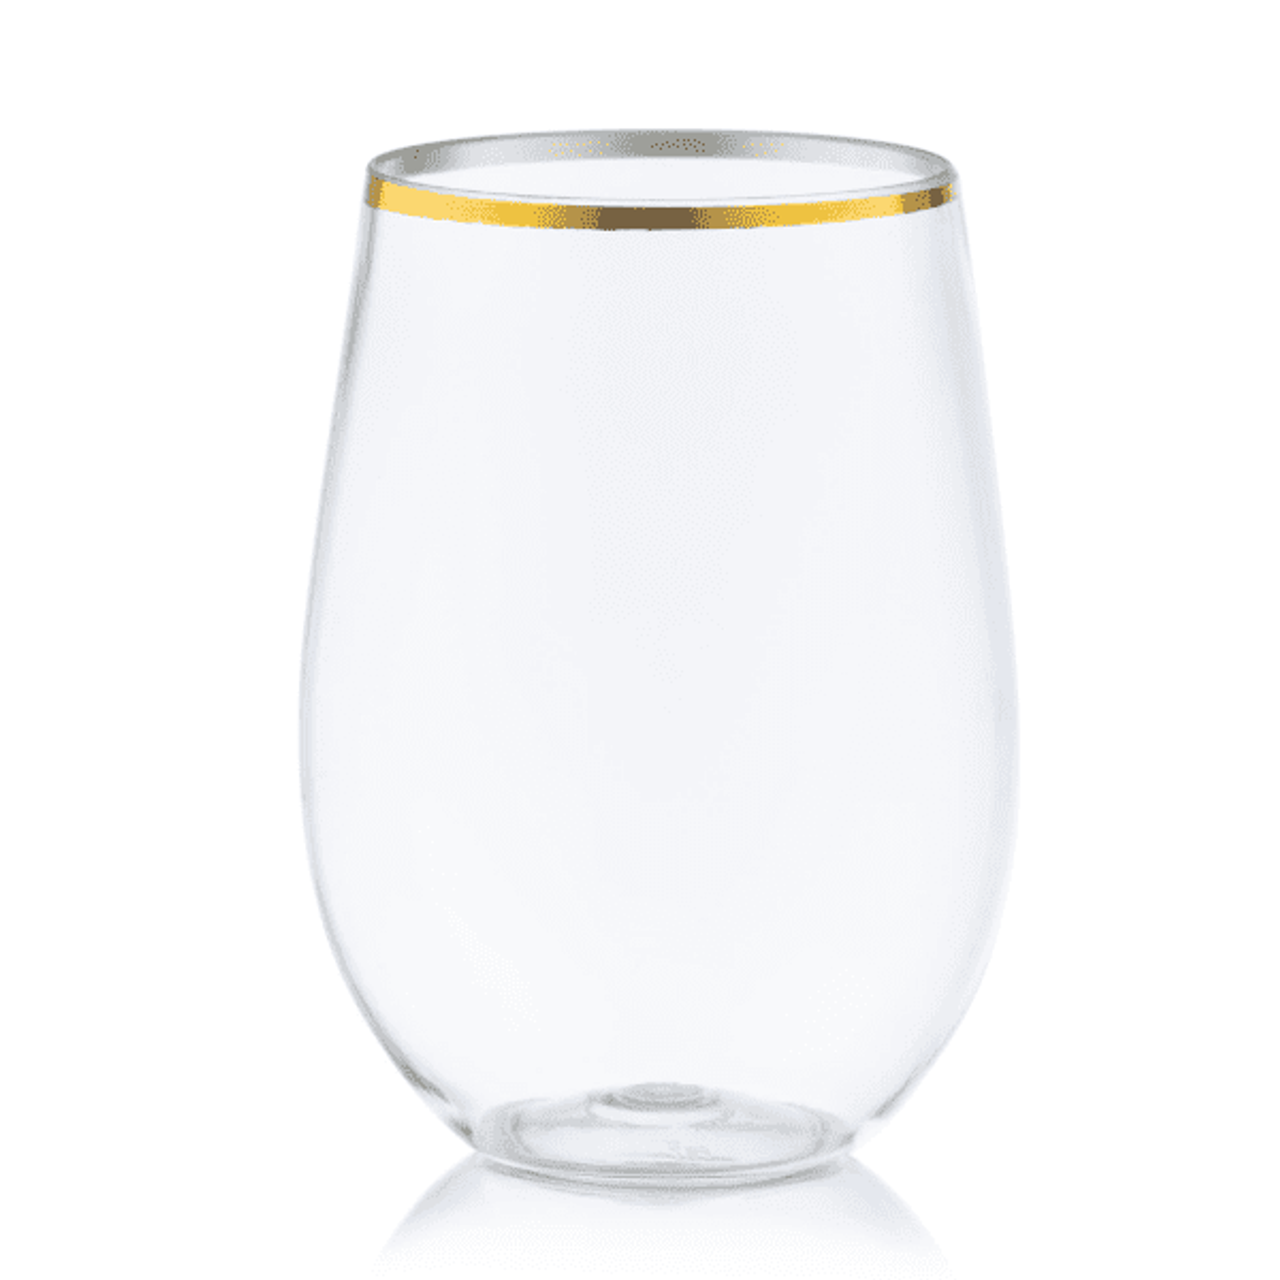 https://cdn11.bigcommerce.com/s-hgqmwywp99/images/stencil/1280x1280/products/48976/43767/12-oz-stemless-plastic-wine-goblet-w-gold-rim-6ct-2__90629.1675880297.png?c=1?imbypass=on